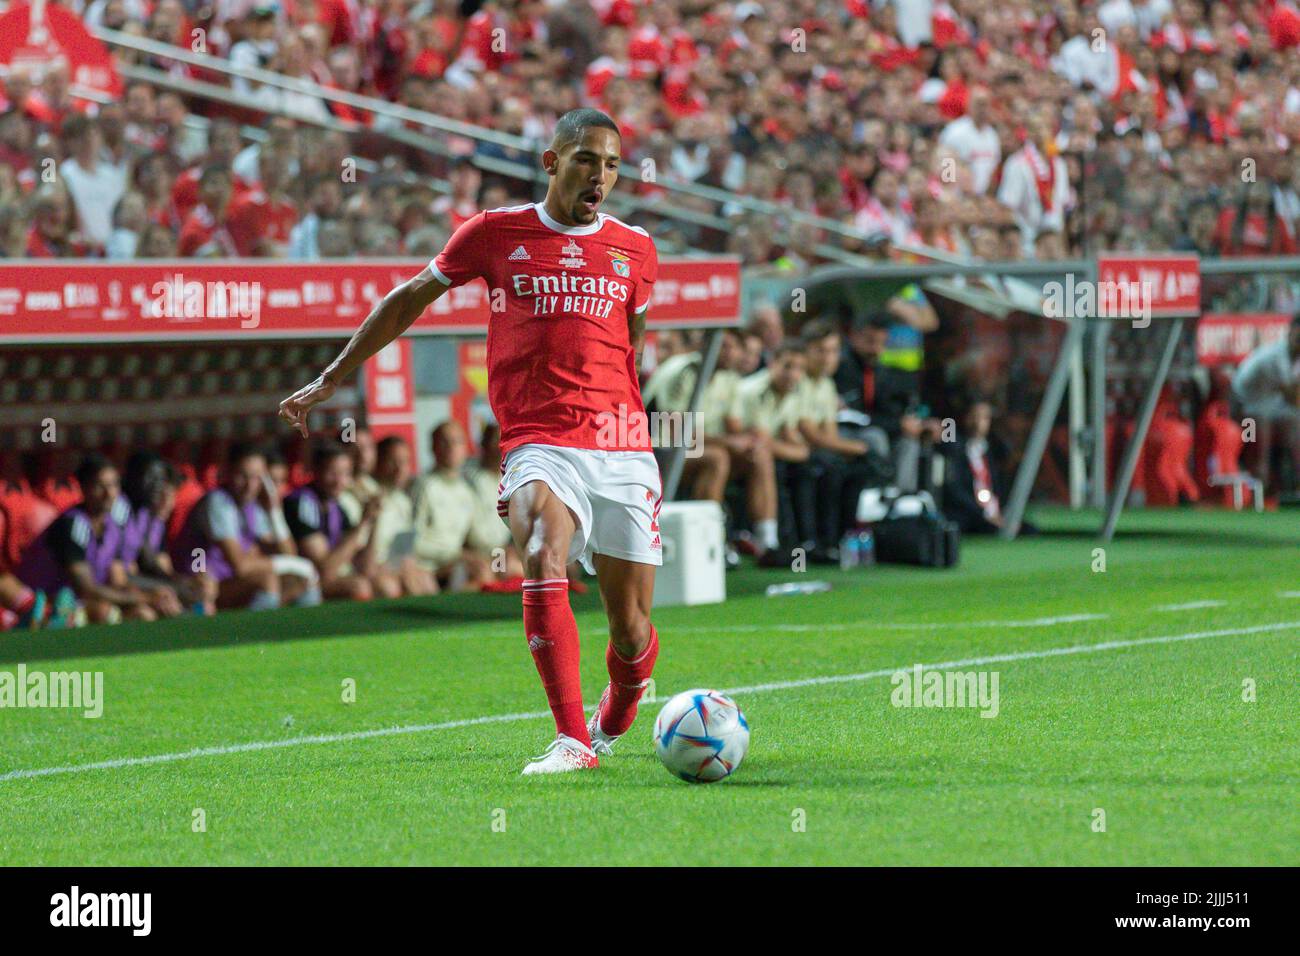 Lisbon, Portugal. July 26, 2022.  Benfica's defender from Brazil Gilberto (2) in action during the friendly game between SL Benfica vs Newcastle United FC Credit: Alexandre de Sousa/Alamy Live News Stock Photo